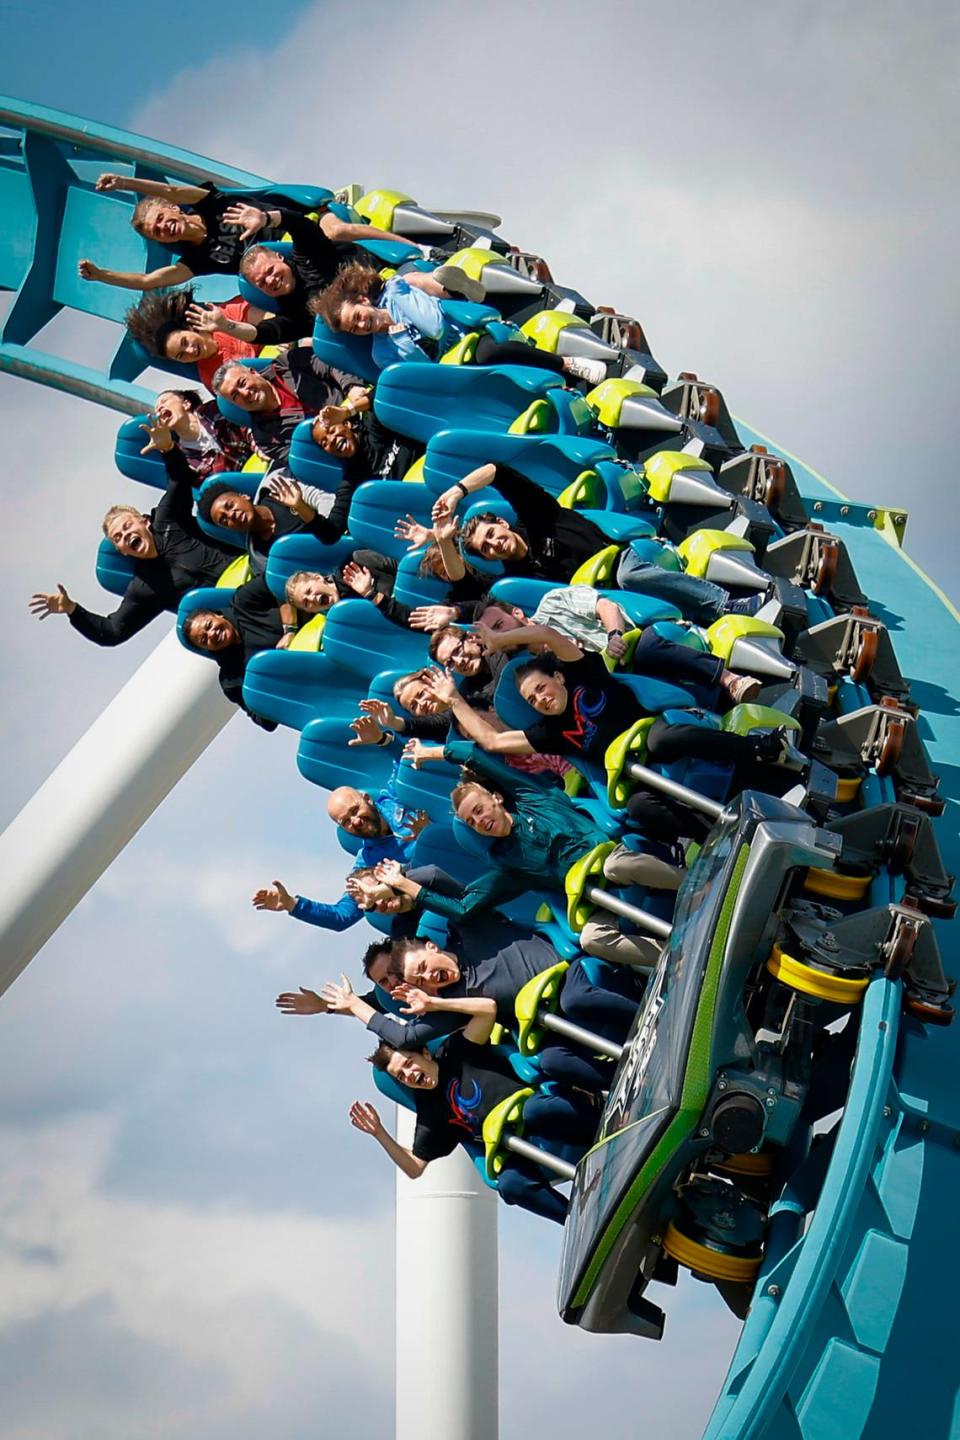 Riders make a turn on Fury 325 at Carowinds in Charlotte, N.C., Friday, April 8, 2022. Fury 325 was unveiled in 2015 and currently remains one of the tallest, fastest and longest roller coasters in the world.